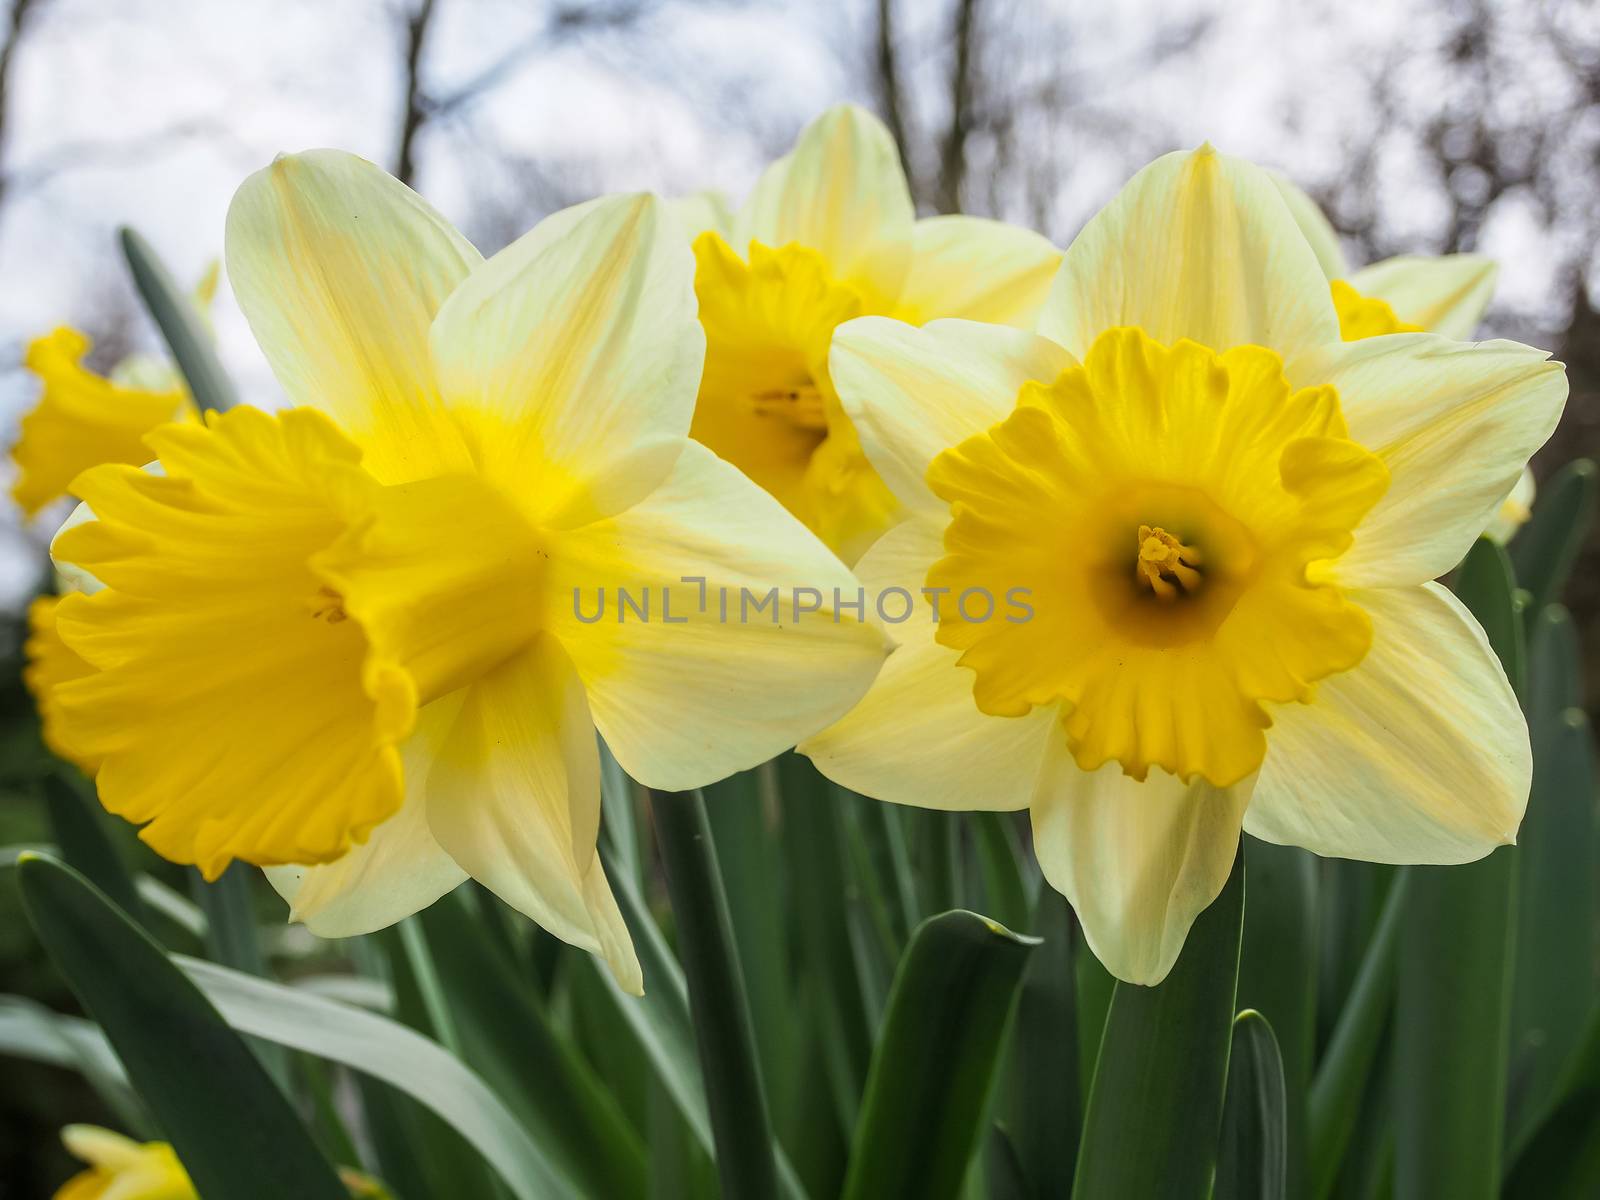 Daffodils (Narcissus) has conspicuous flowers with six petal-like tepals surmounted by a cup- or trumpet-shaped corona. It is the symbol of cancer charities in many countries.